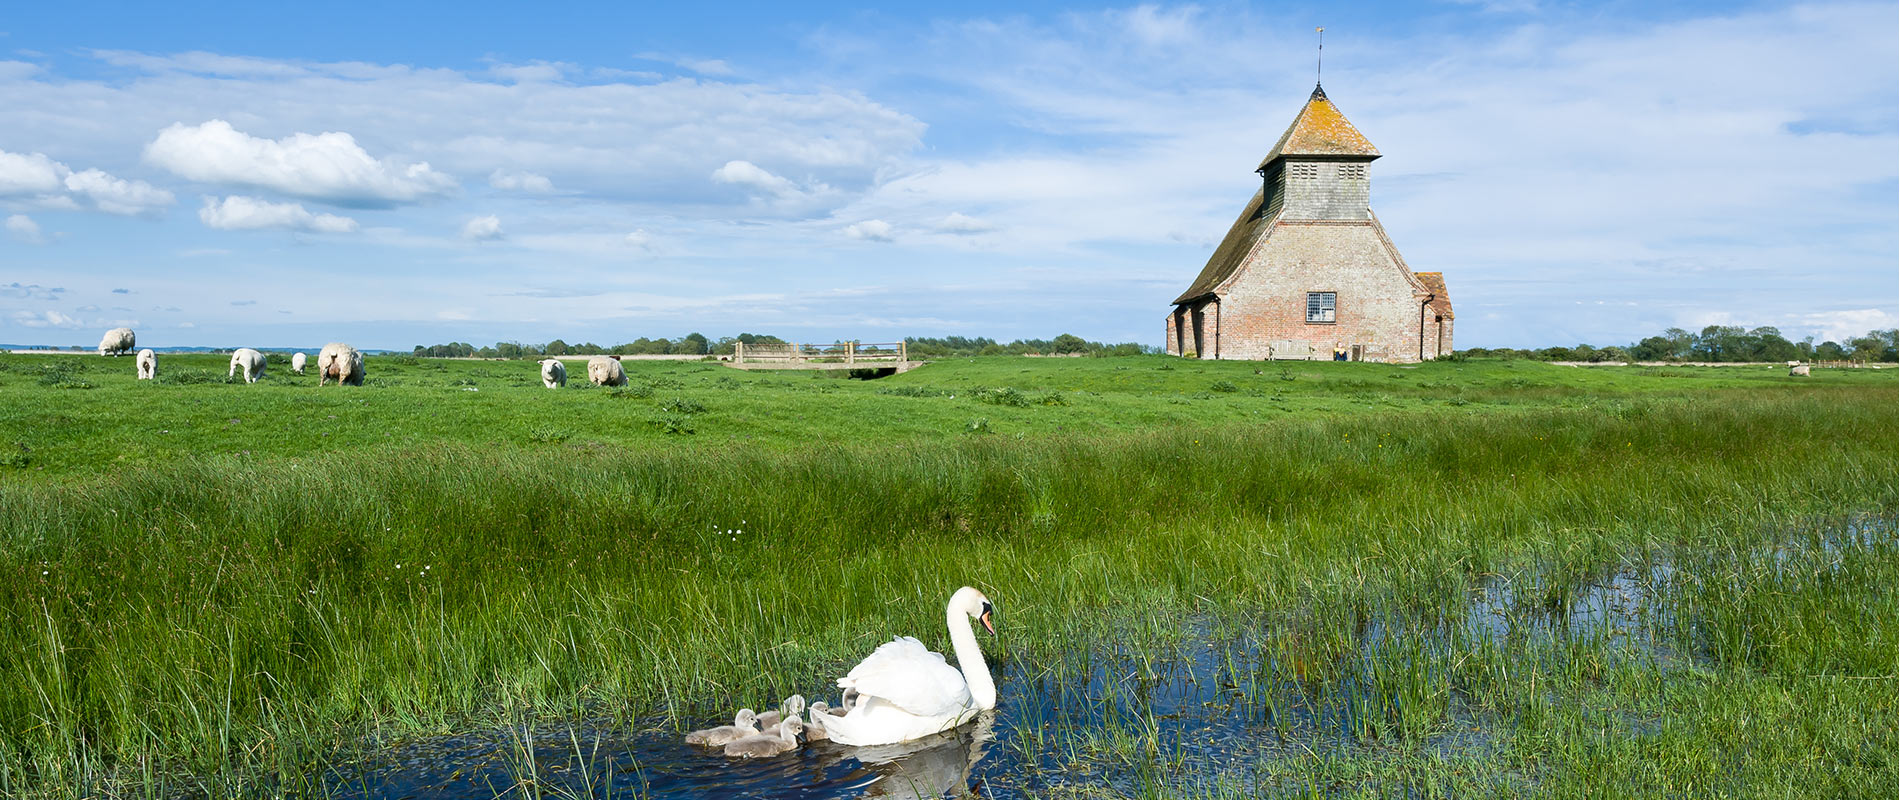 Family of swans in Romney Marsh with nearby sheep grazing